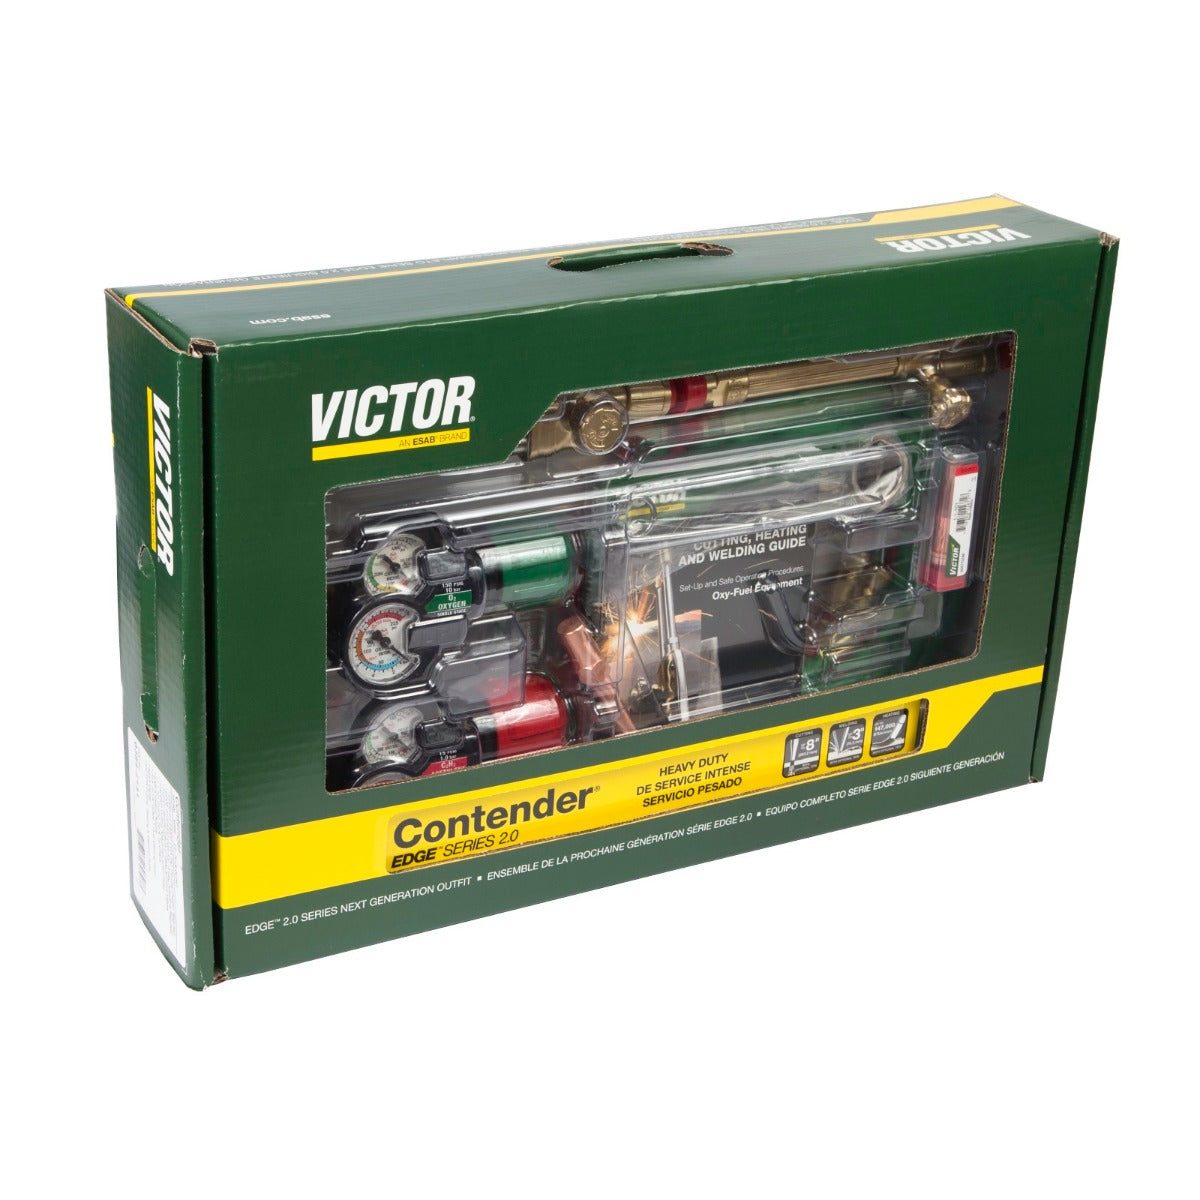 Victor Contender 2.0 Heavy Duty Welding and Cutting Outfit (0384-2131)